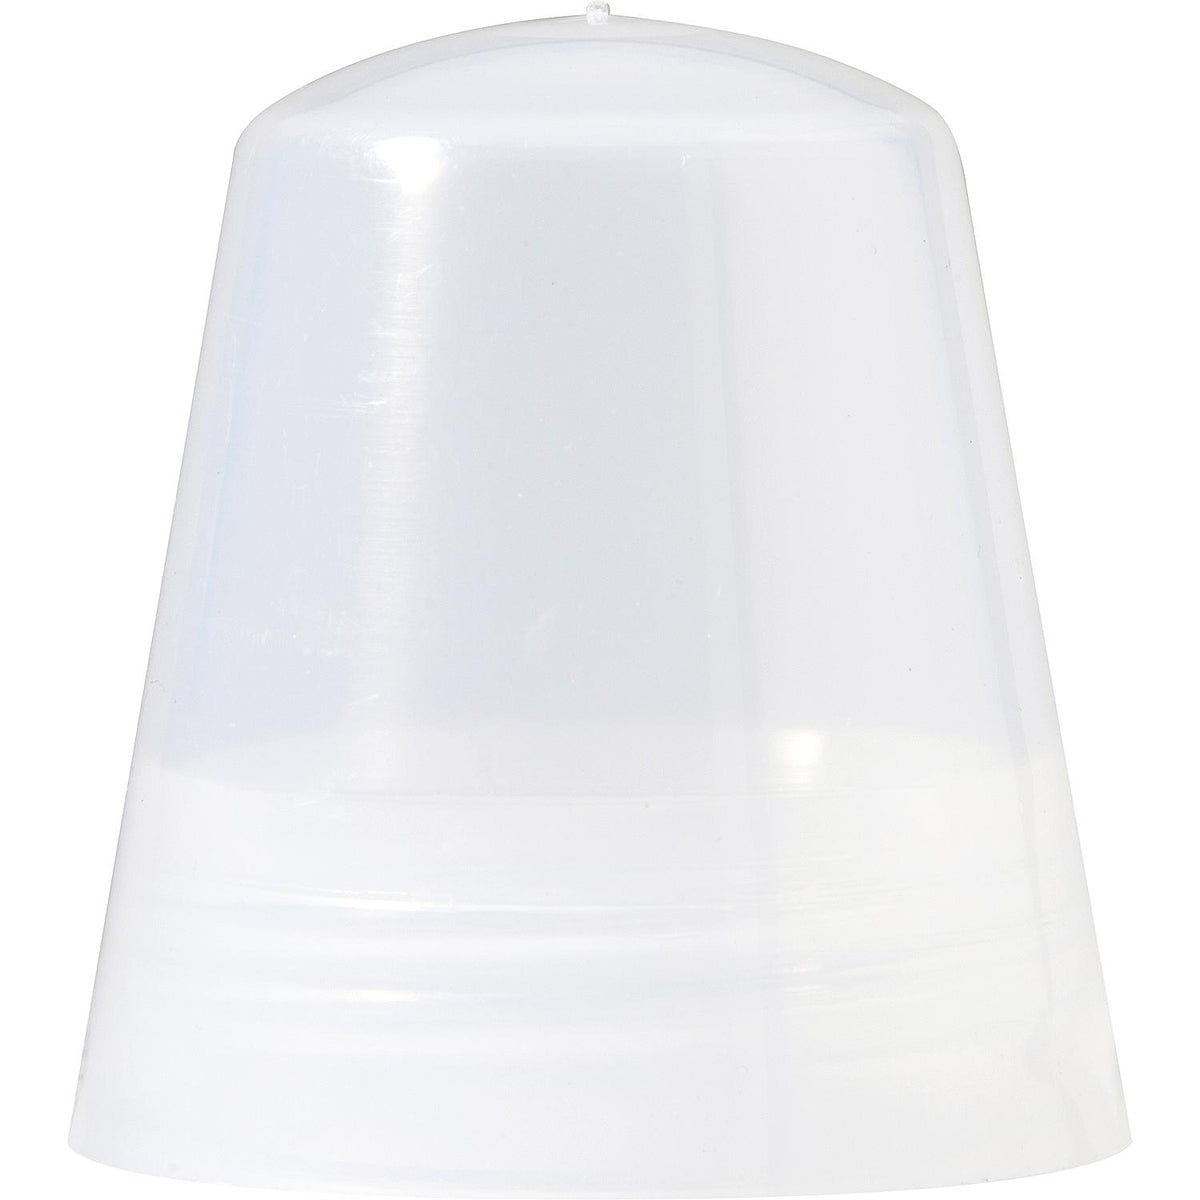 Attwood Marine Qualifies for Free Shipping Attwood Replacement Globe Translucent for All-Round Lights #91017B7